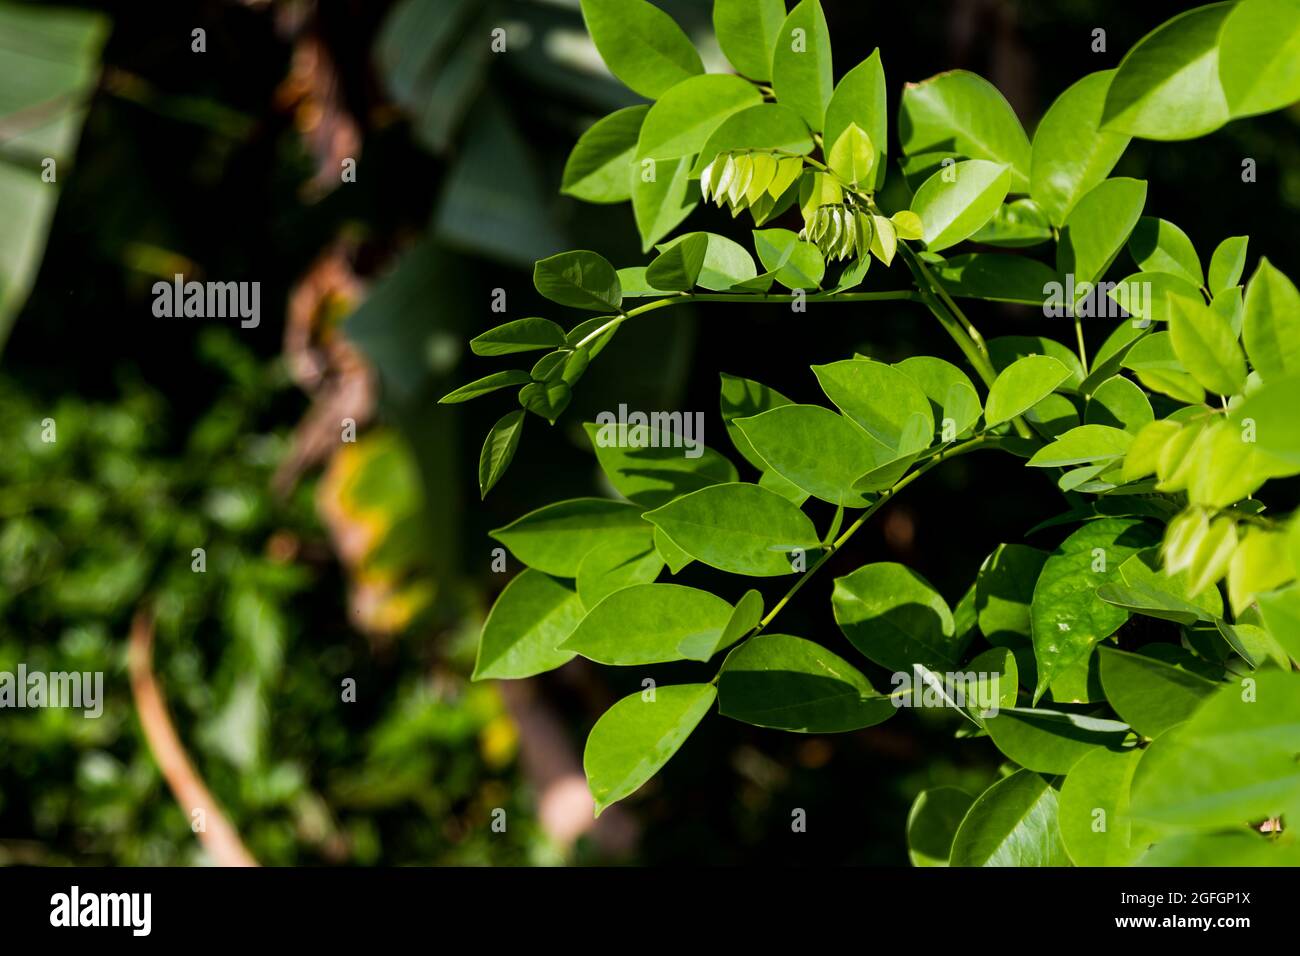 Gamal leaf shoots are light green and dark green on a green leaf background Stock Photo